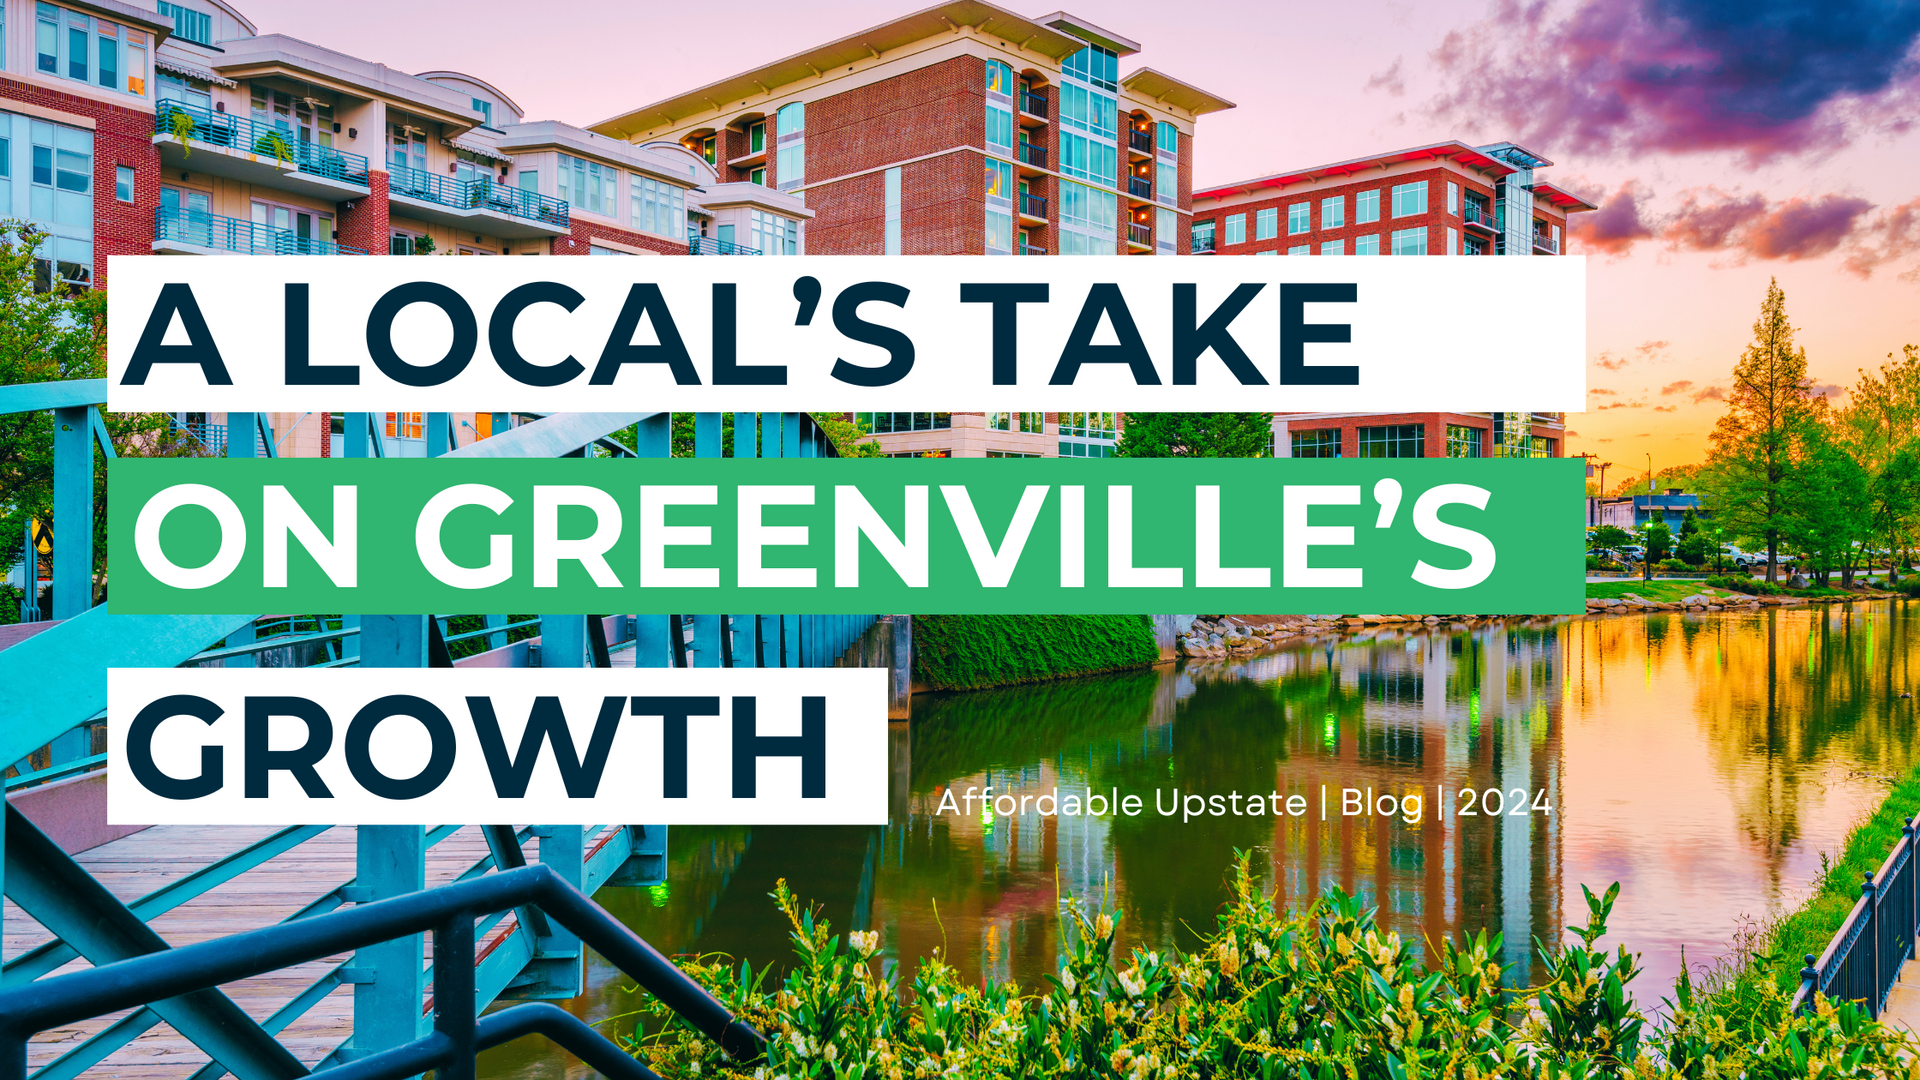 A Local's Take on Greenville's Growth: Affordable Upstate to ensure housing for all residents